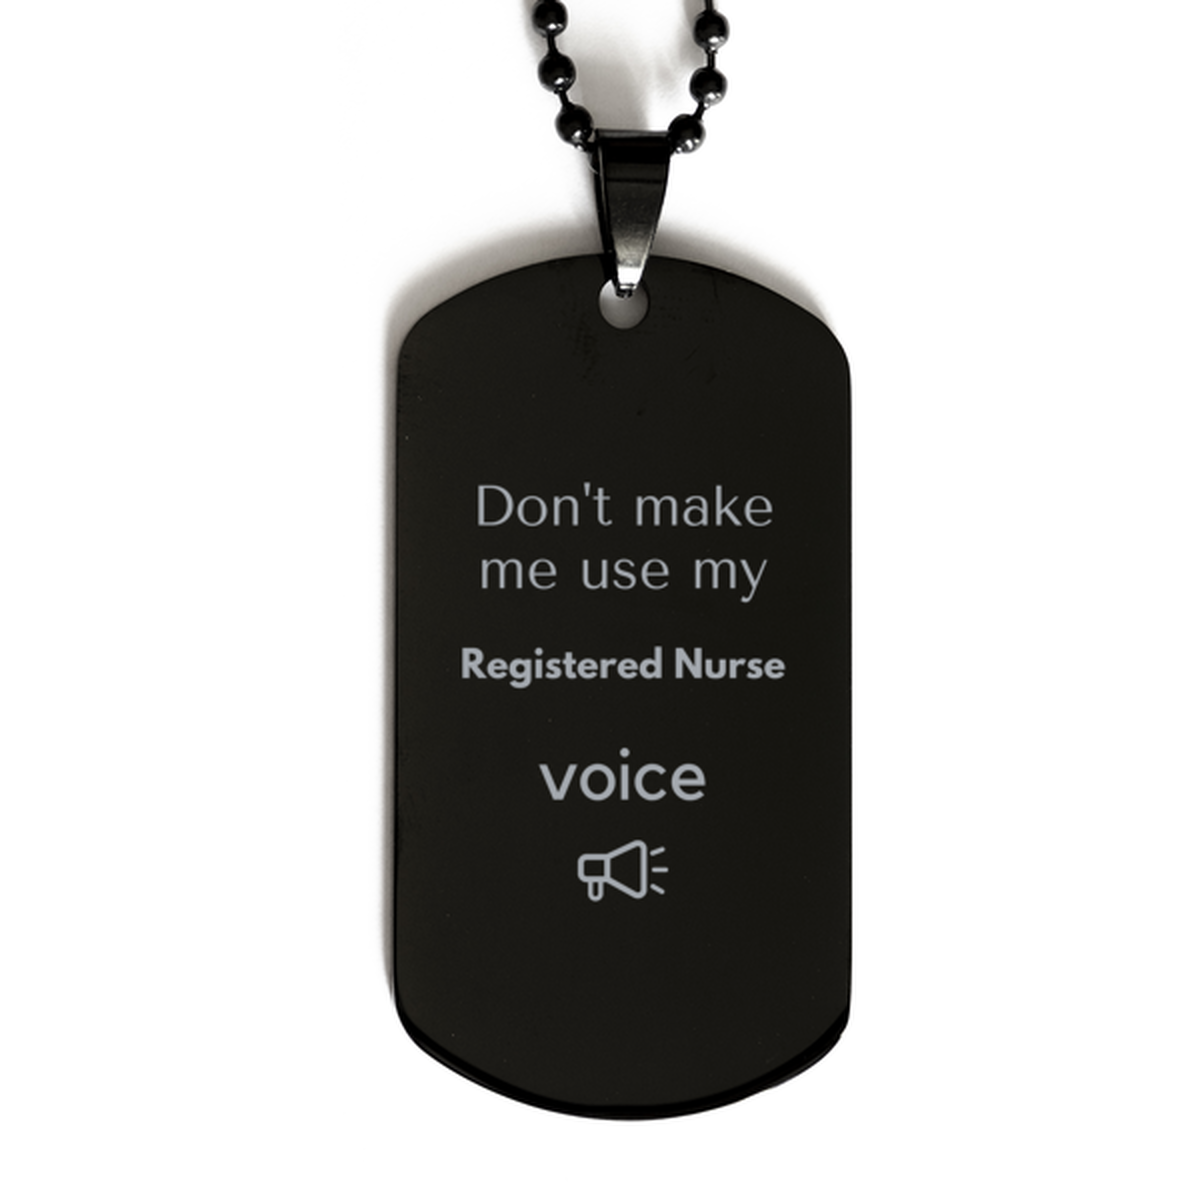 Don't make me use my Registered Nurse voice, Sarcasm Registered Nurse Gifts, Christmas Registered Nurse Black Dog Tag Birthday Unique Gifts For Registered Nurse Coworkers, Men, Women, Colleague, Friends